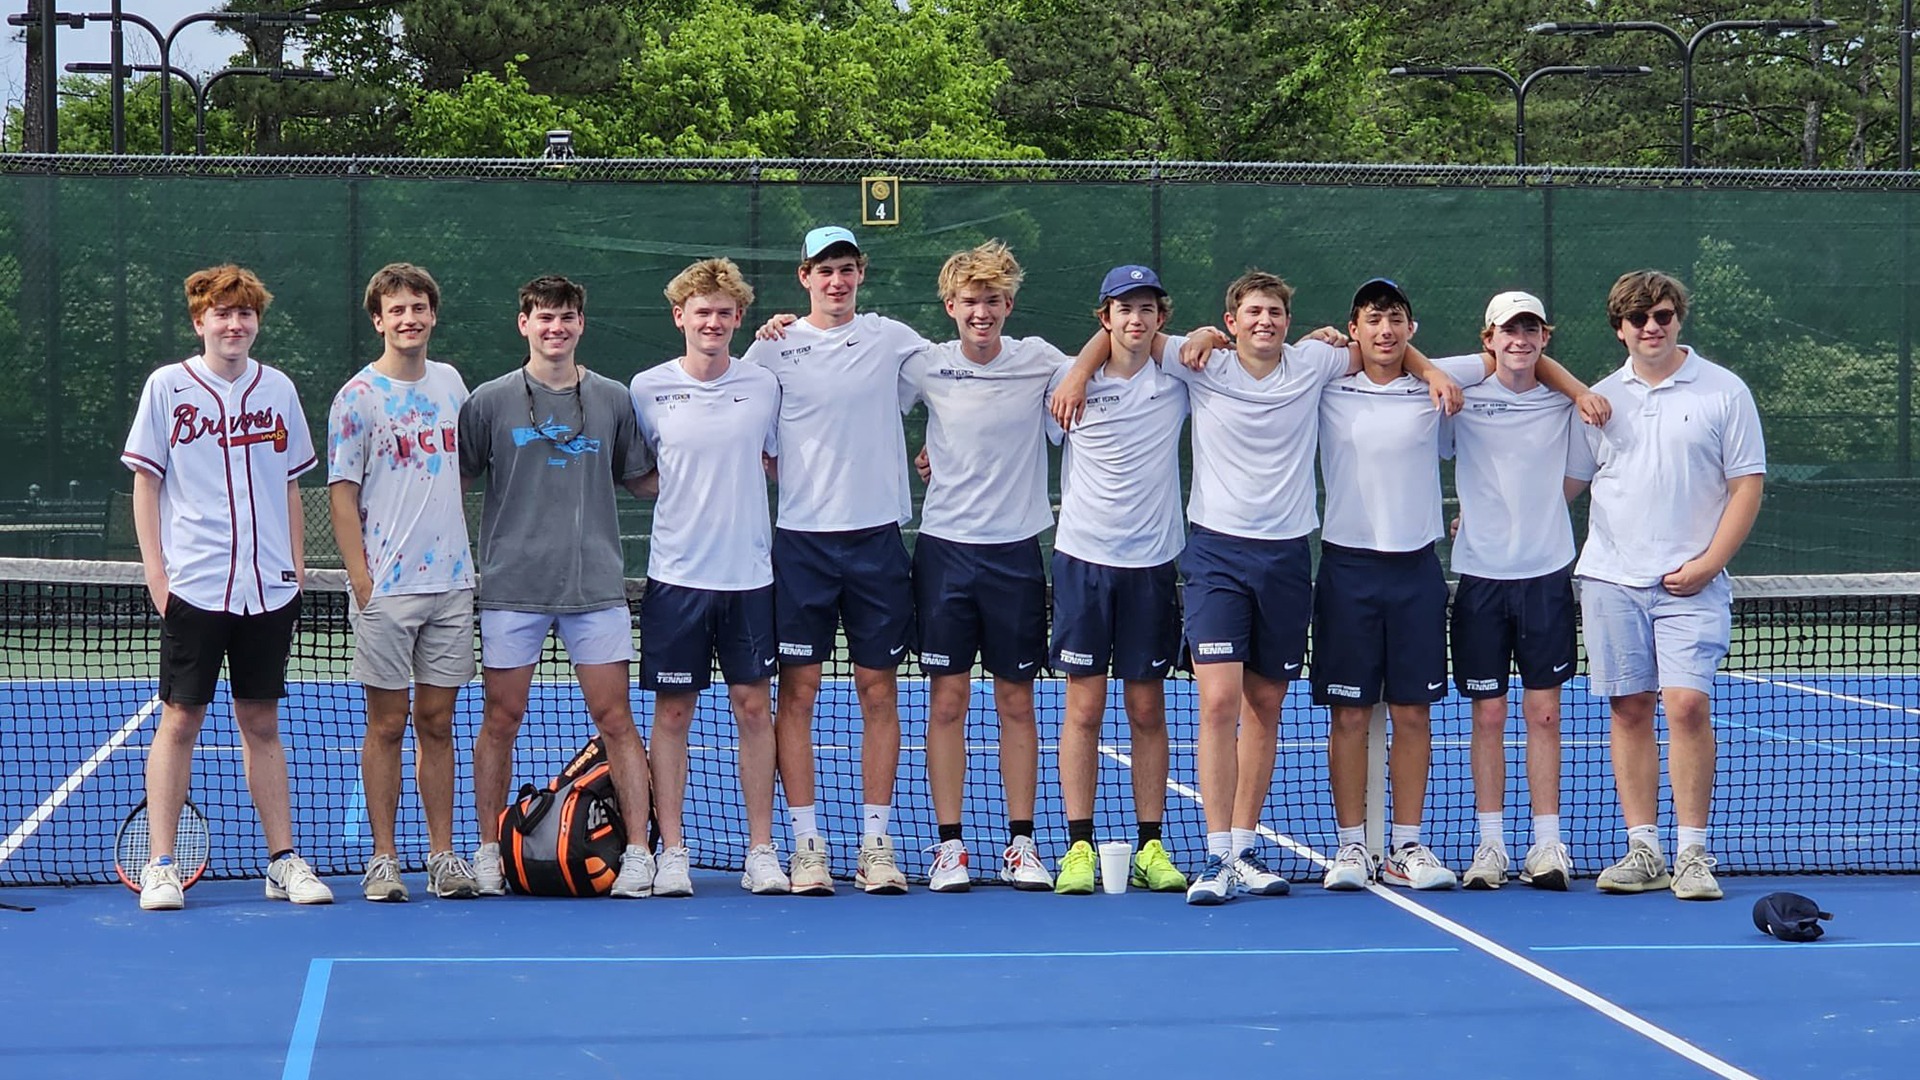 Mt. Vernon Slide 1 - BOYS TENNIS RETURNS TO STATE CHAMPIONSHIP WITH 3-1 WIN OVER GALLOWAY